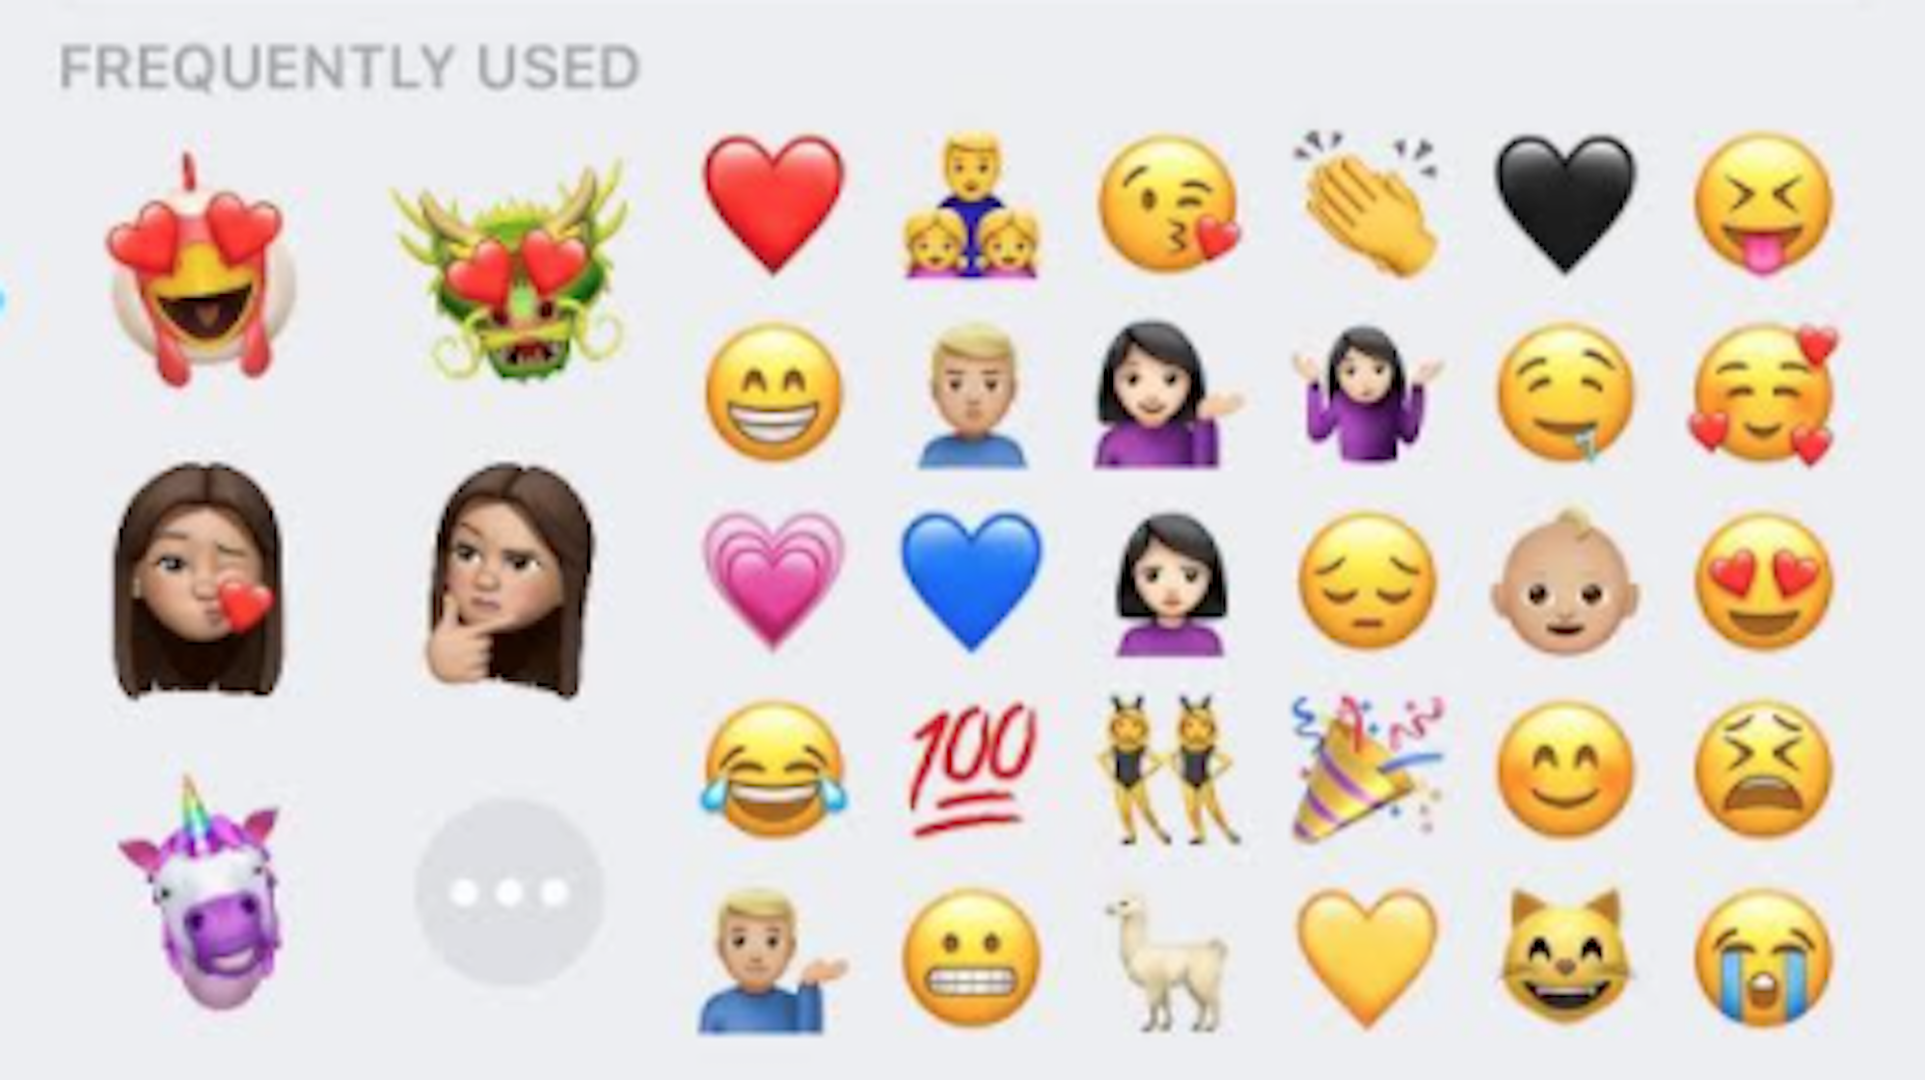 Marley Frequently Used Emojis